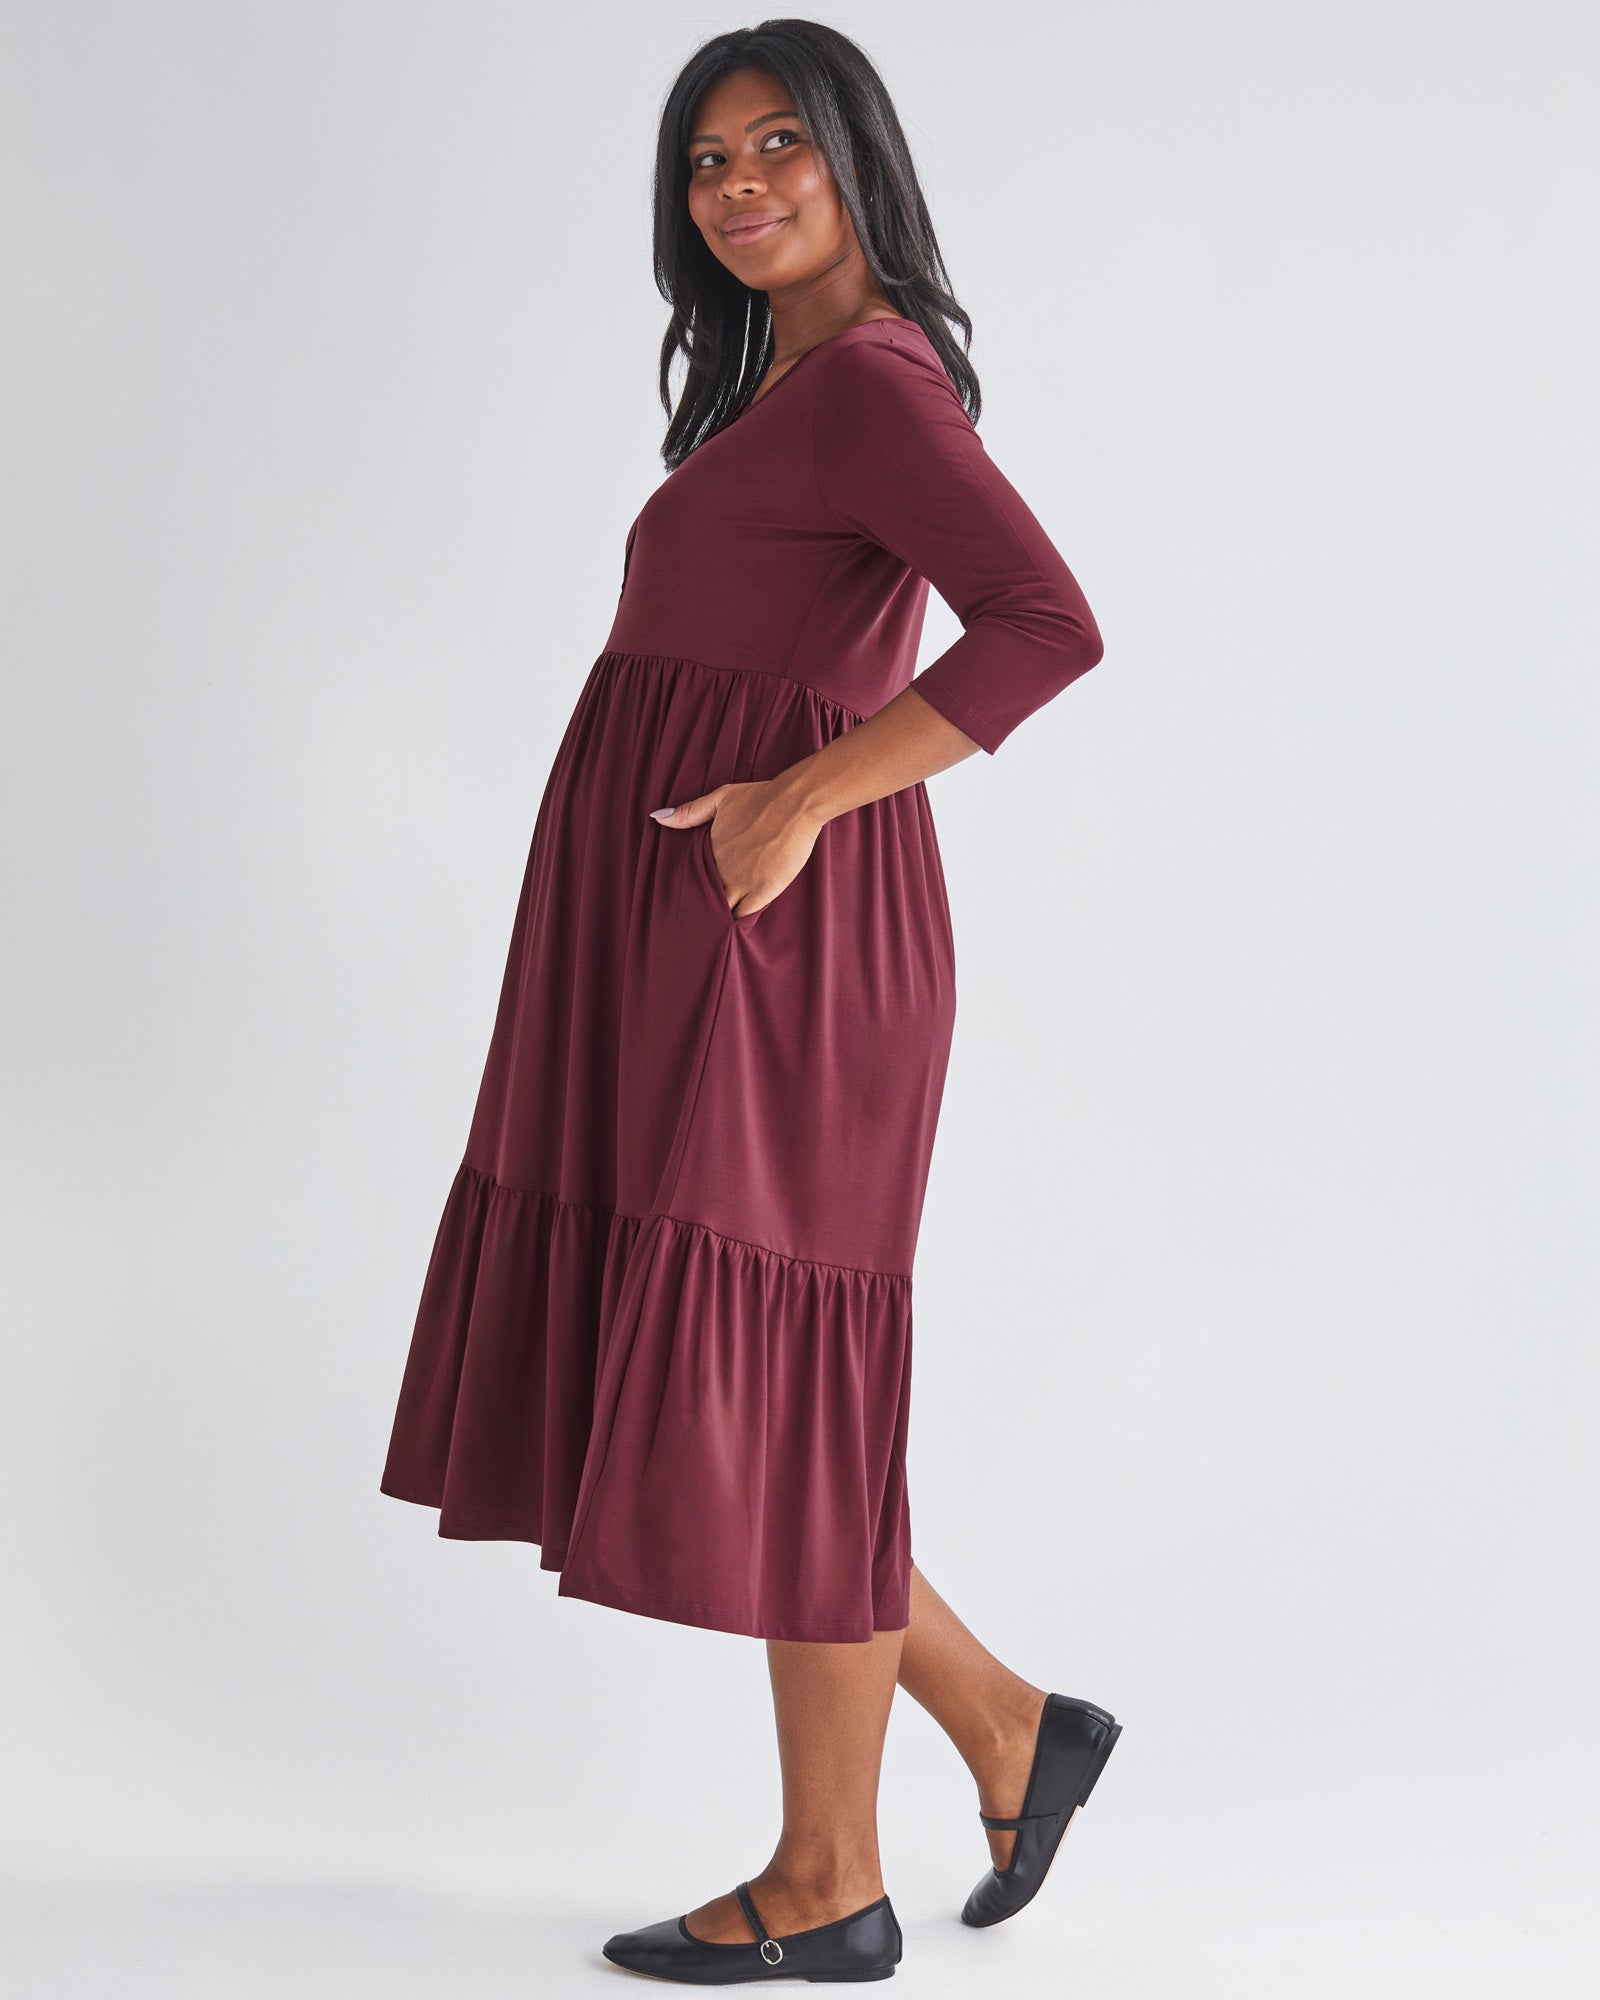 Side View - A Pregnannt Woman Wearing Tiered Maternity Midi Dress in Burgundy from Angel Maternity.